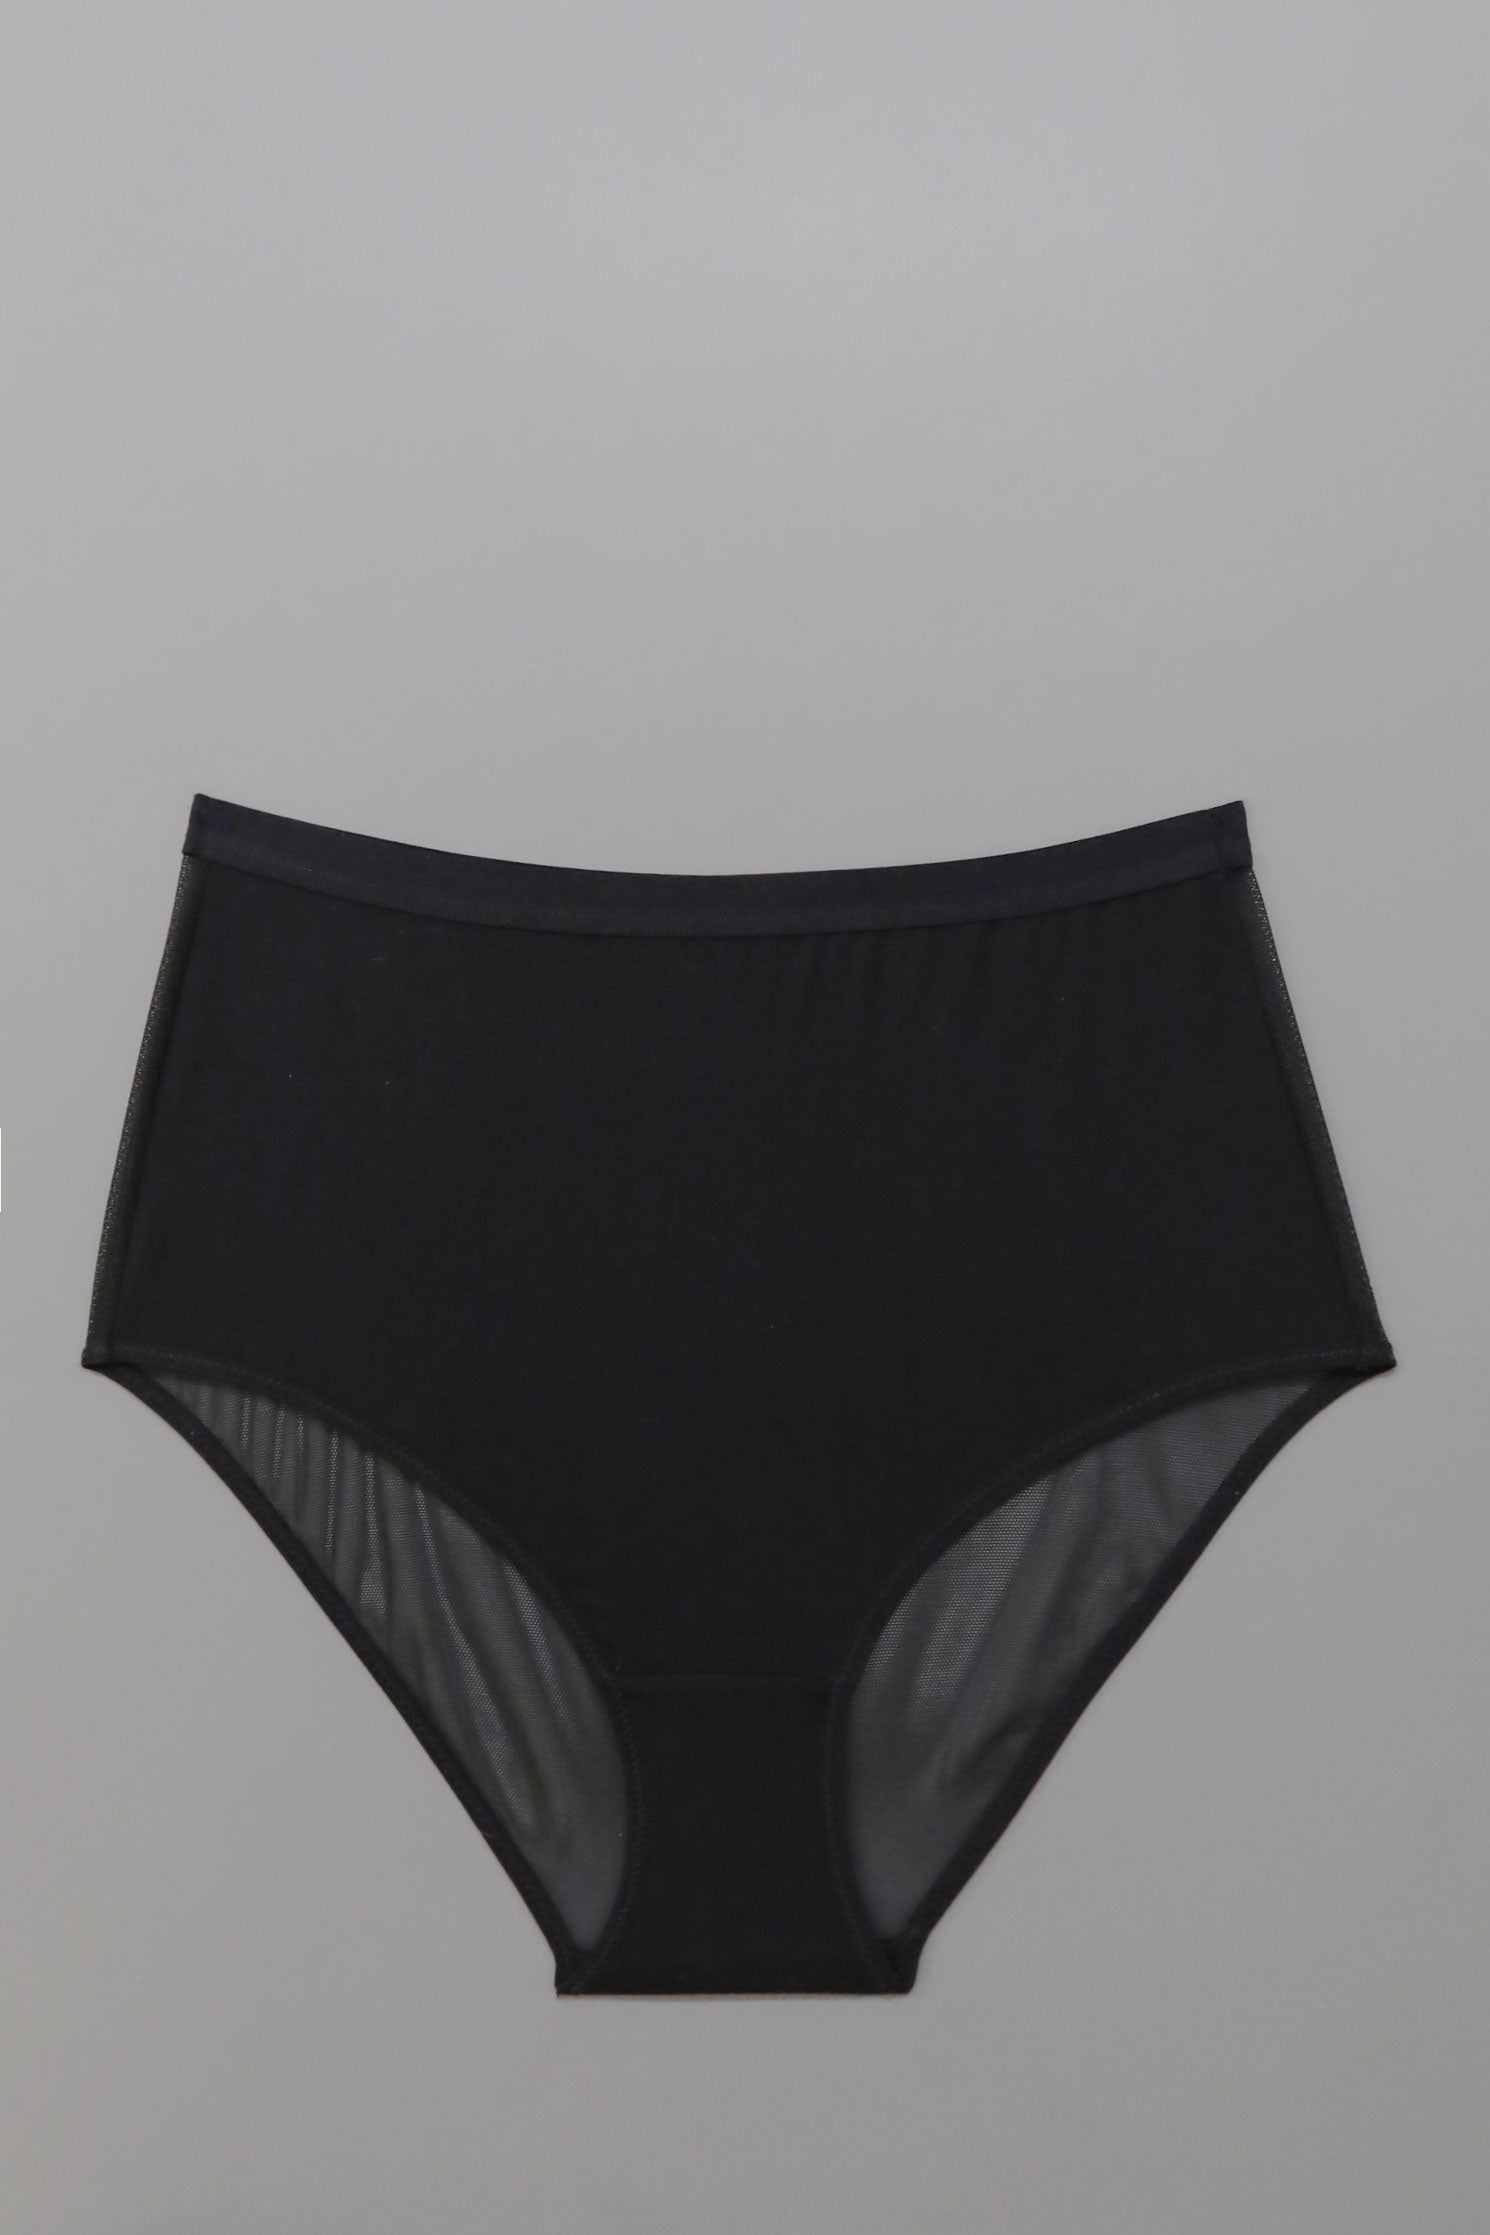 Lux High Waist Brief in Black Sample - MARY YOUNG